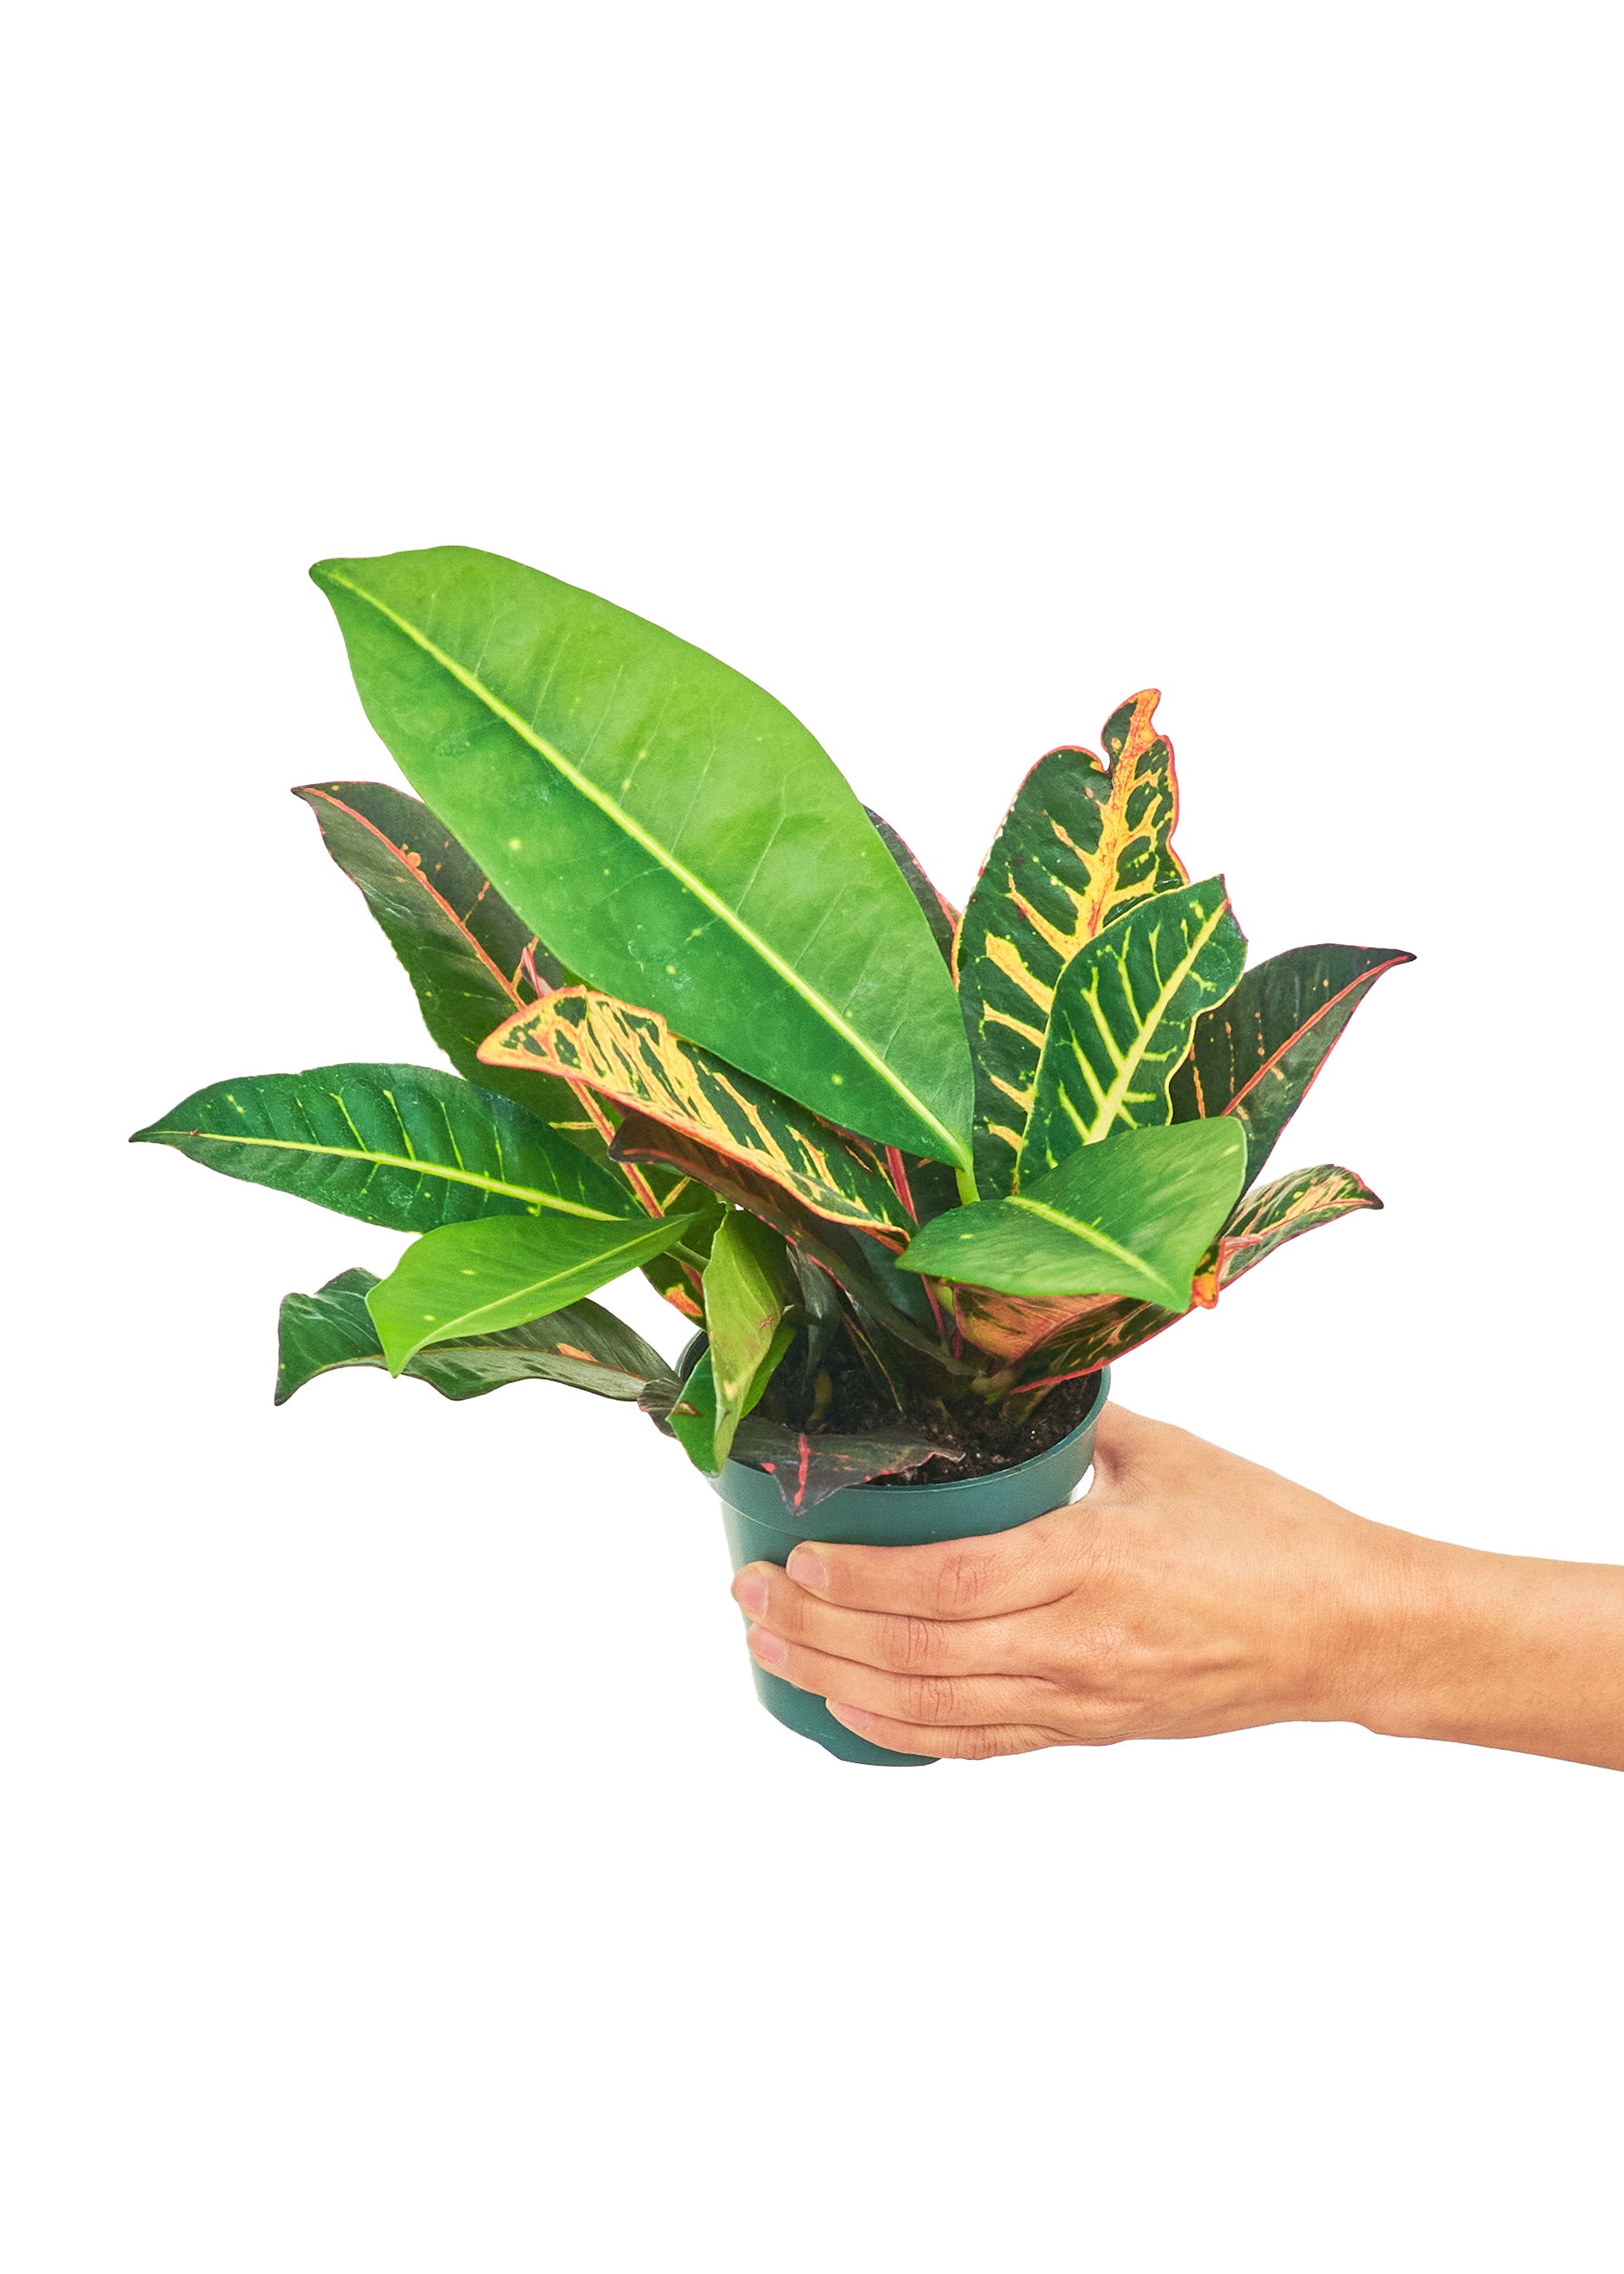 Small size Croton Petra plant in a growers pot with a white background with a hand holding the pot to show the top view